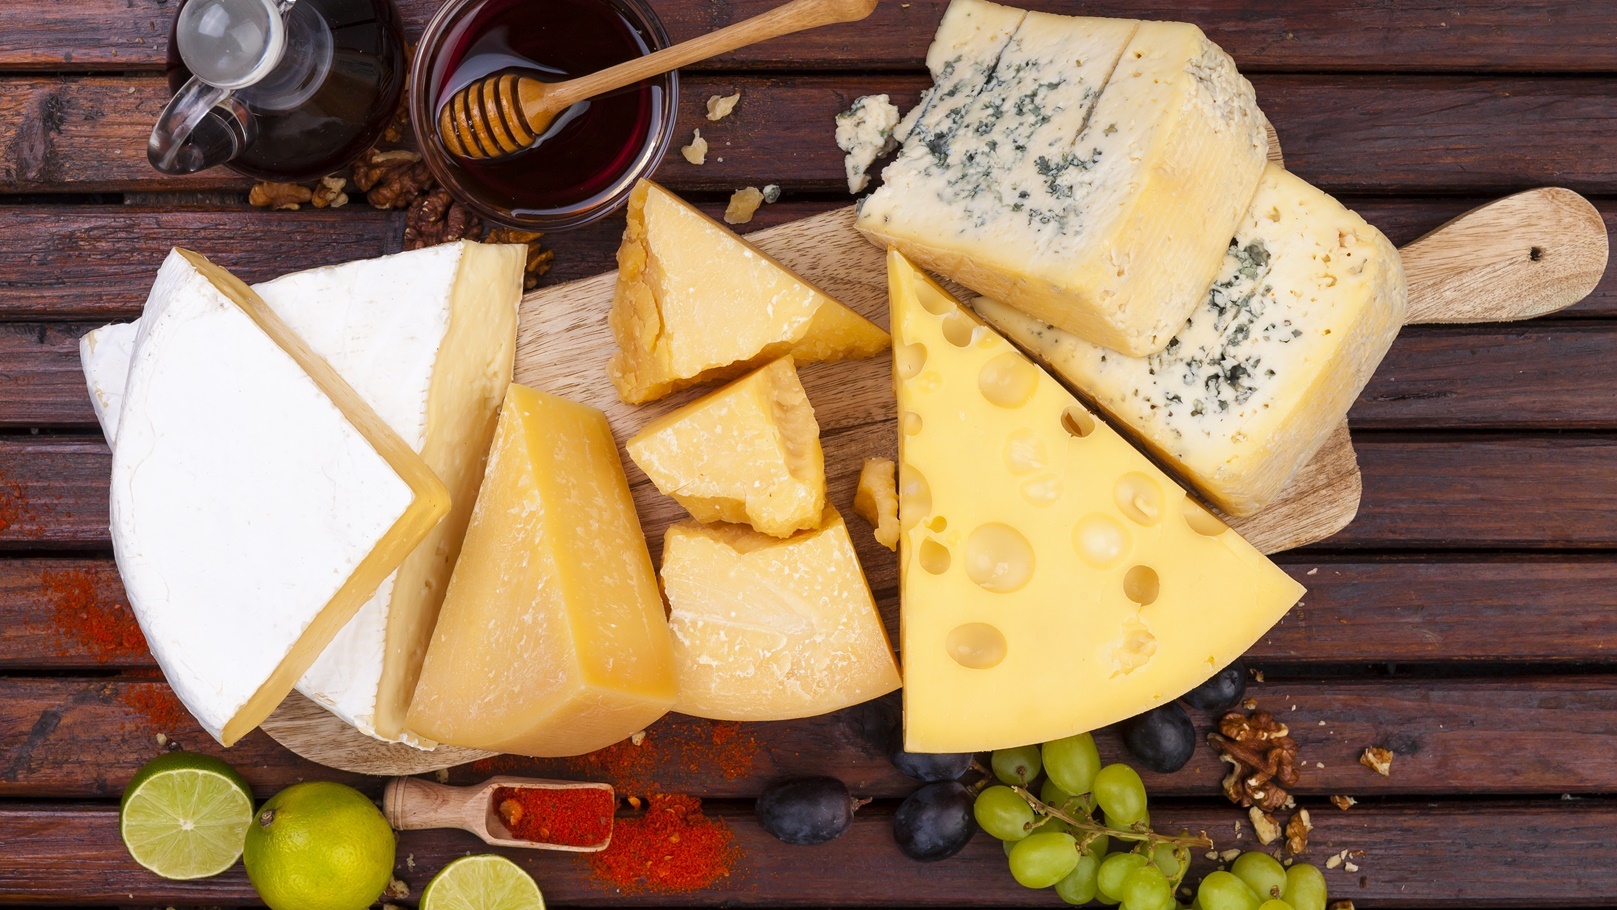 cheese-board-various-types-of-cheese-top-view-2021-08-31-13-43-52-utc